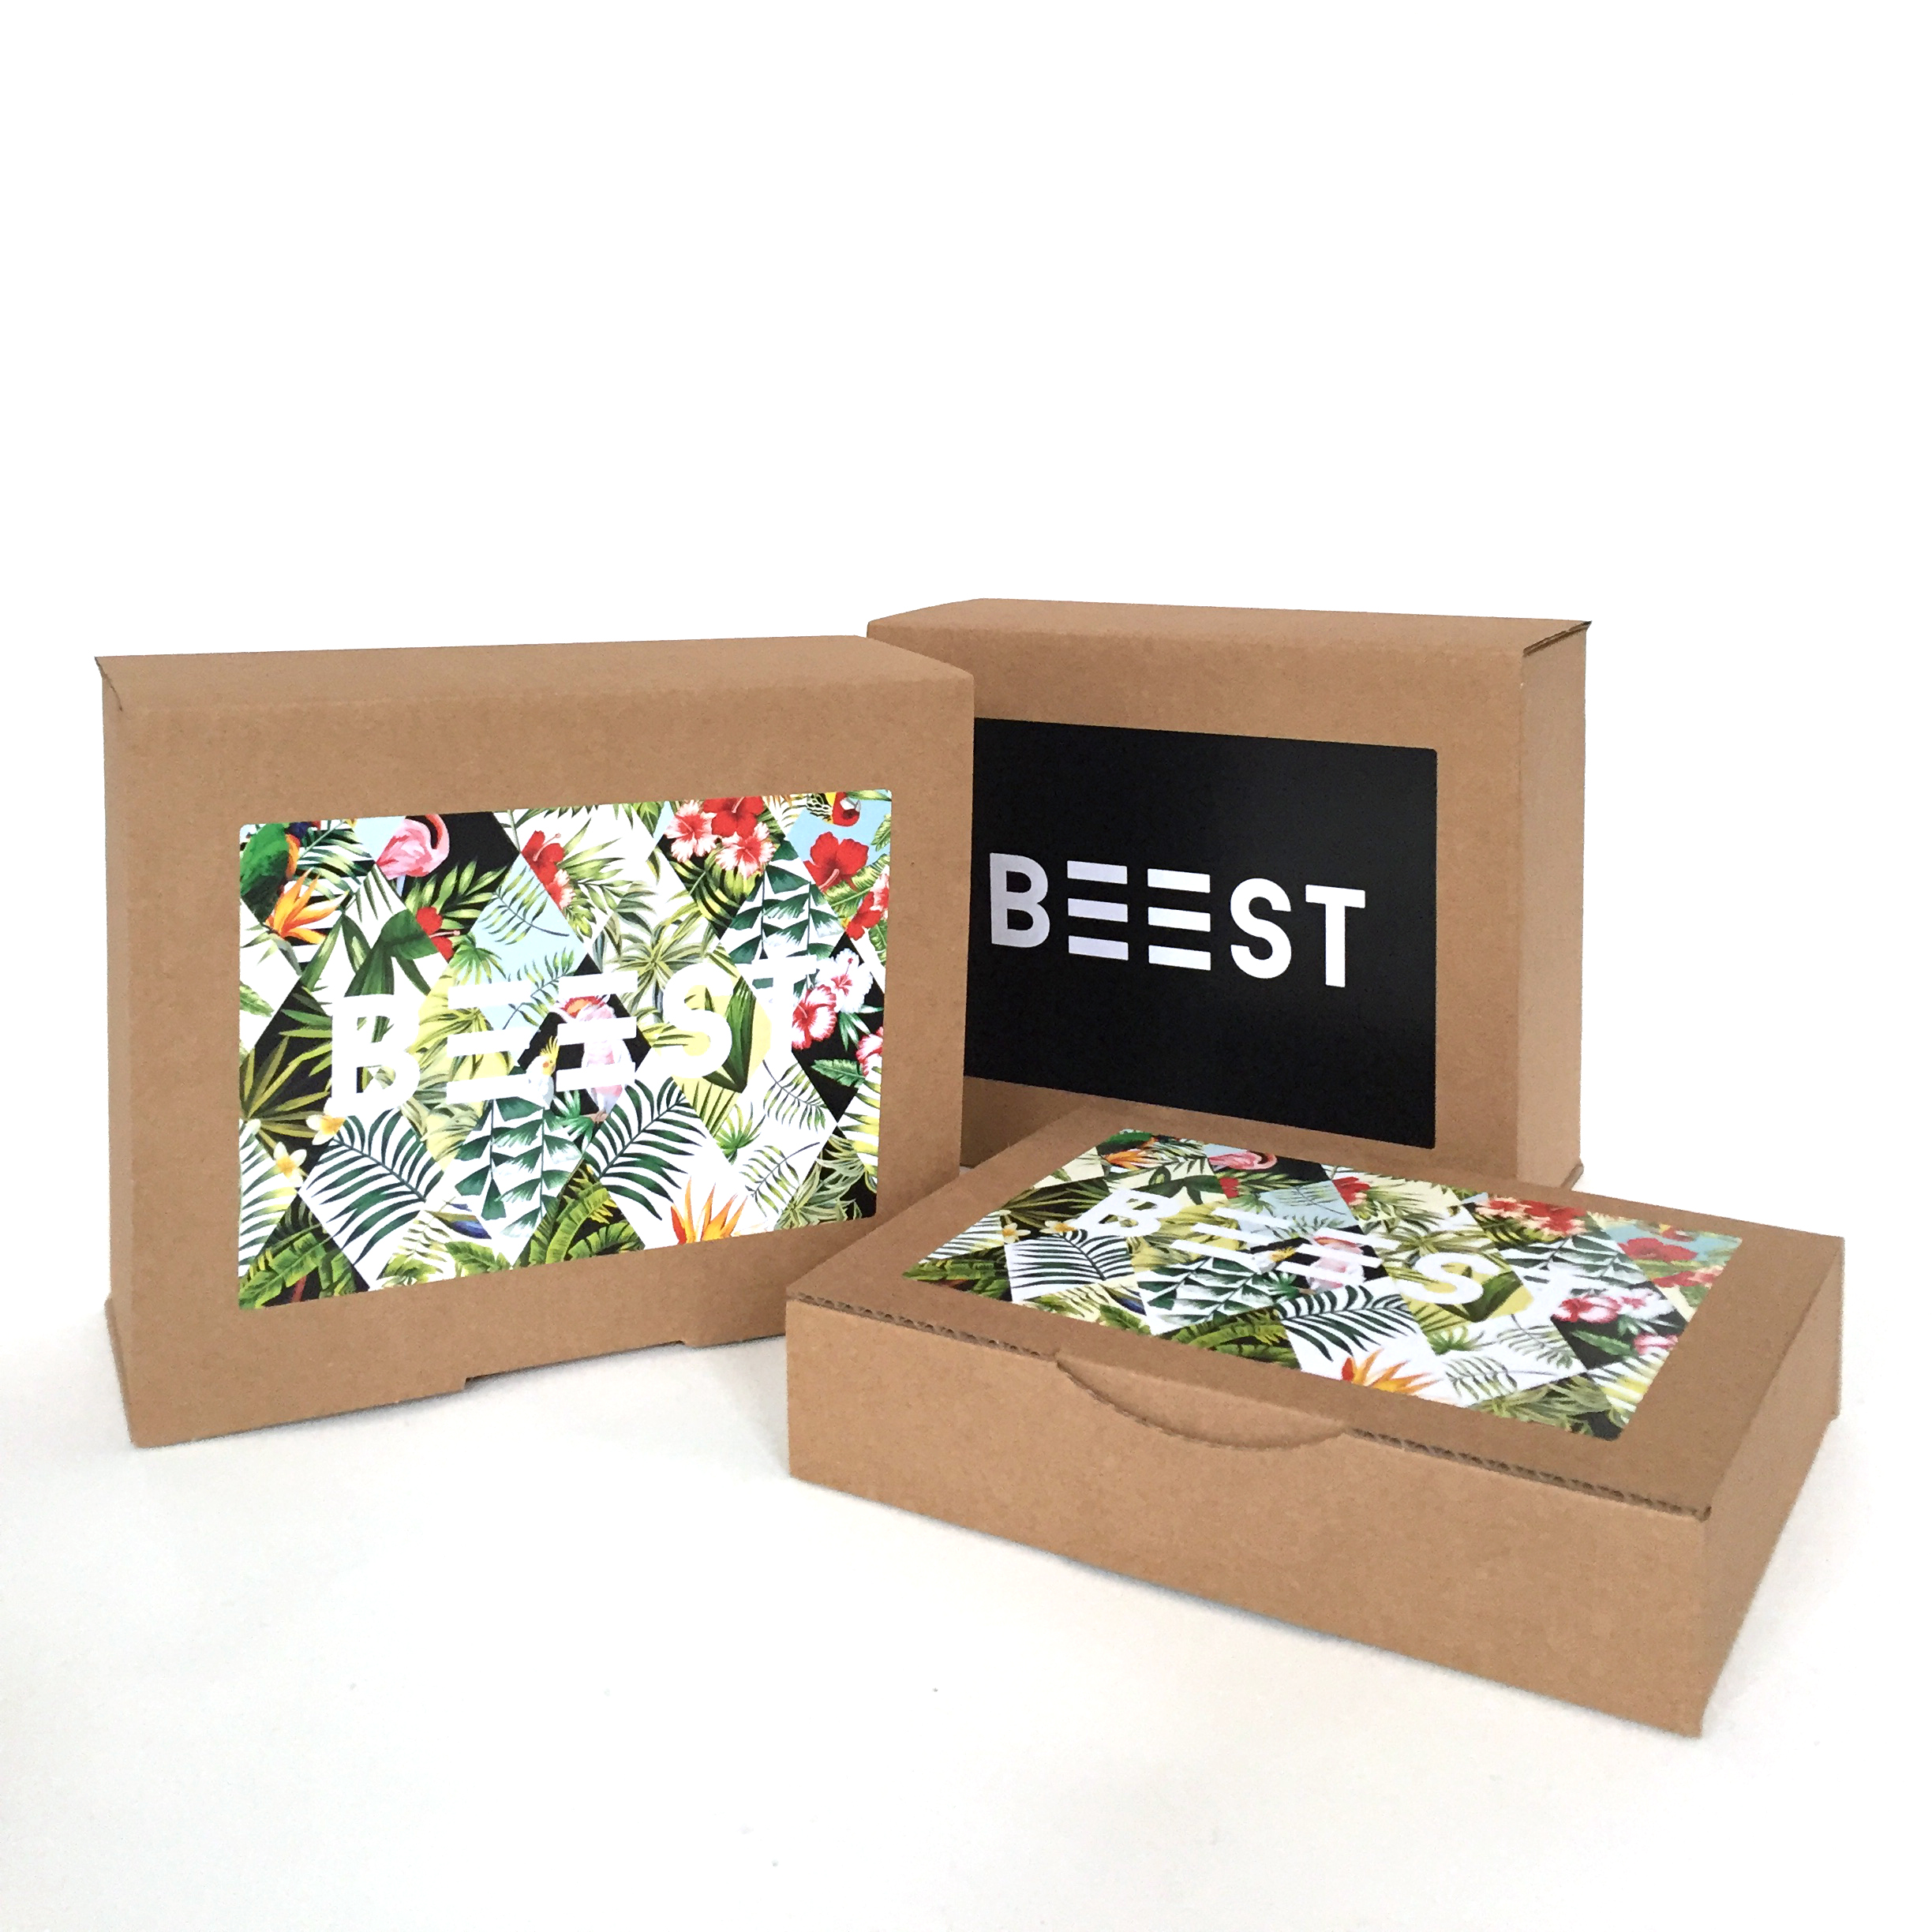 beest sweaters christmas gifts